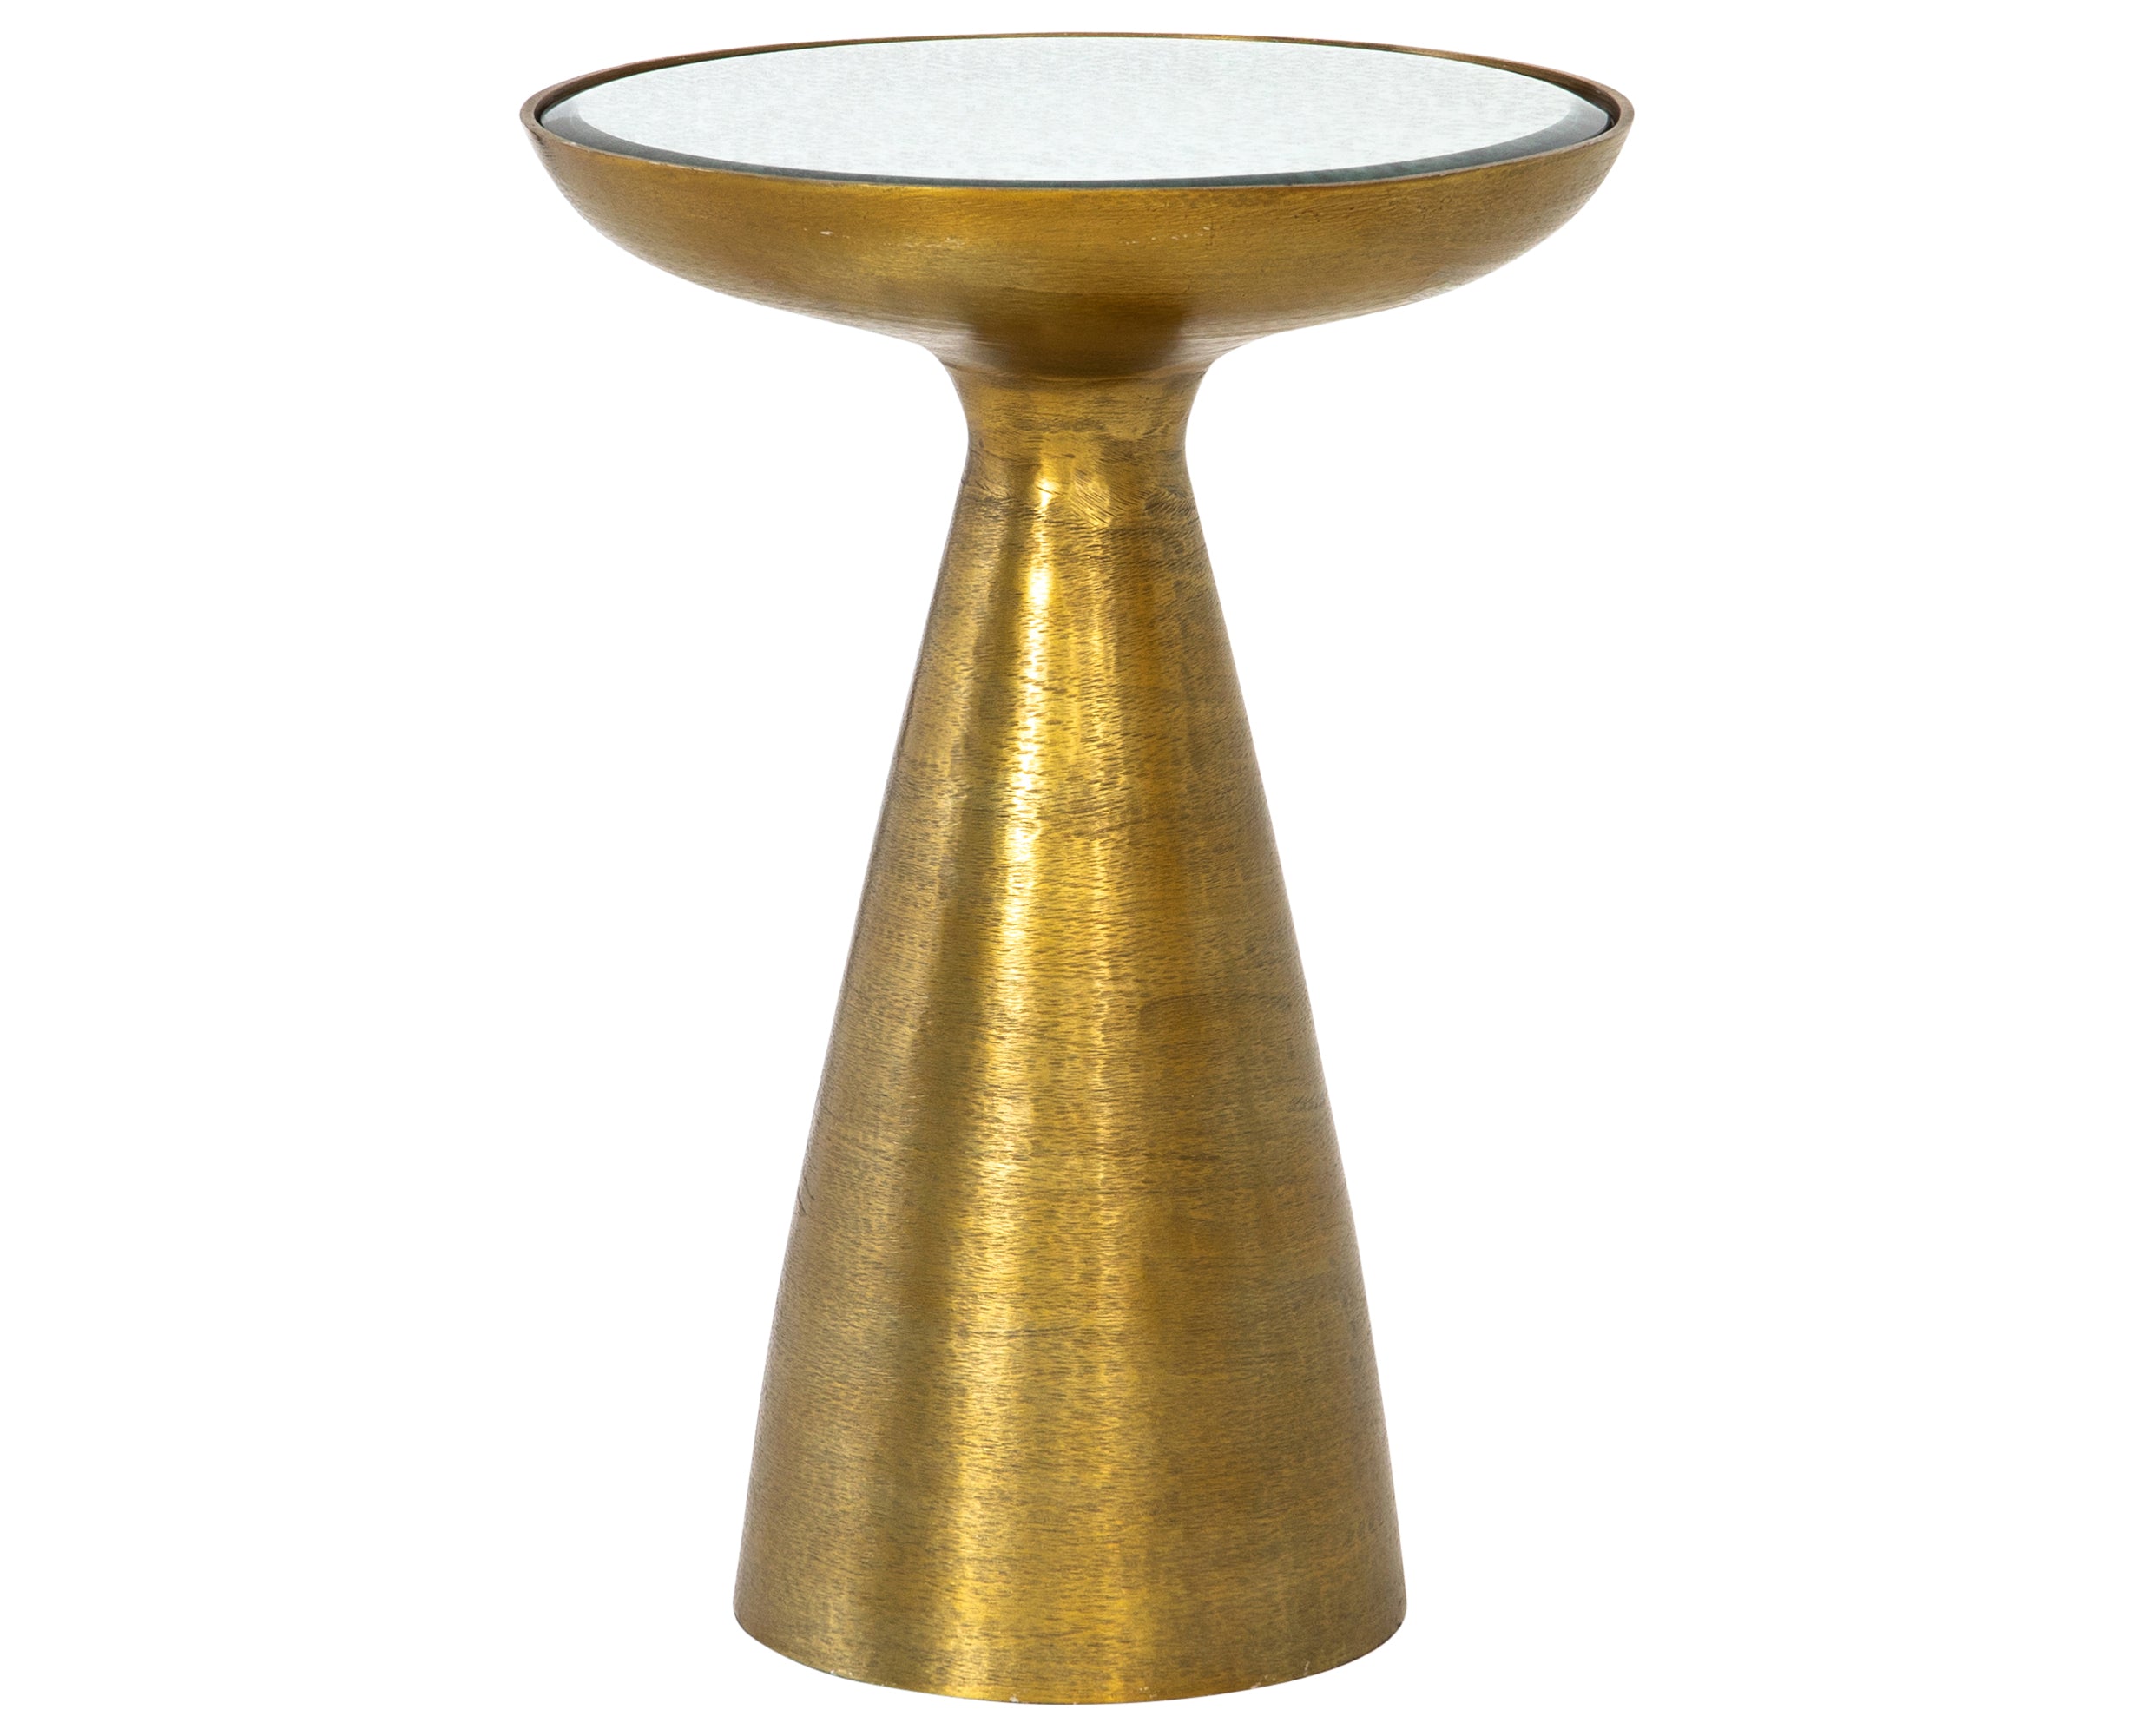 Brushed Brass with Ash Glass | Marlow Mod Pedestal Table | Valley Ridge Furniture